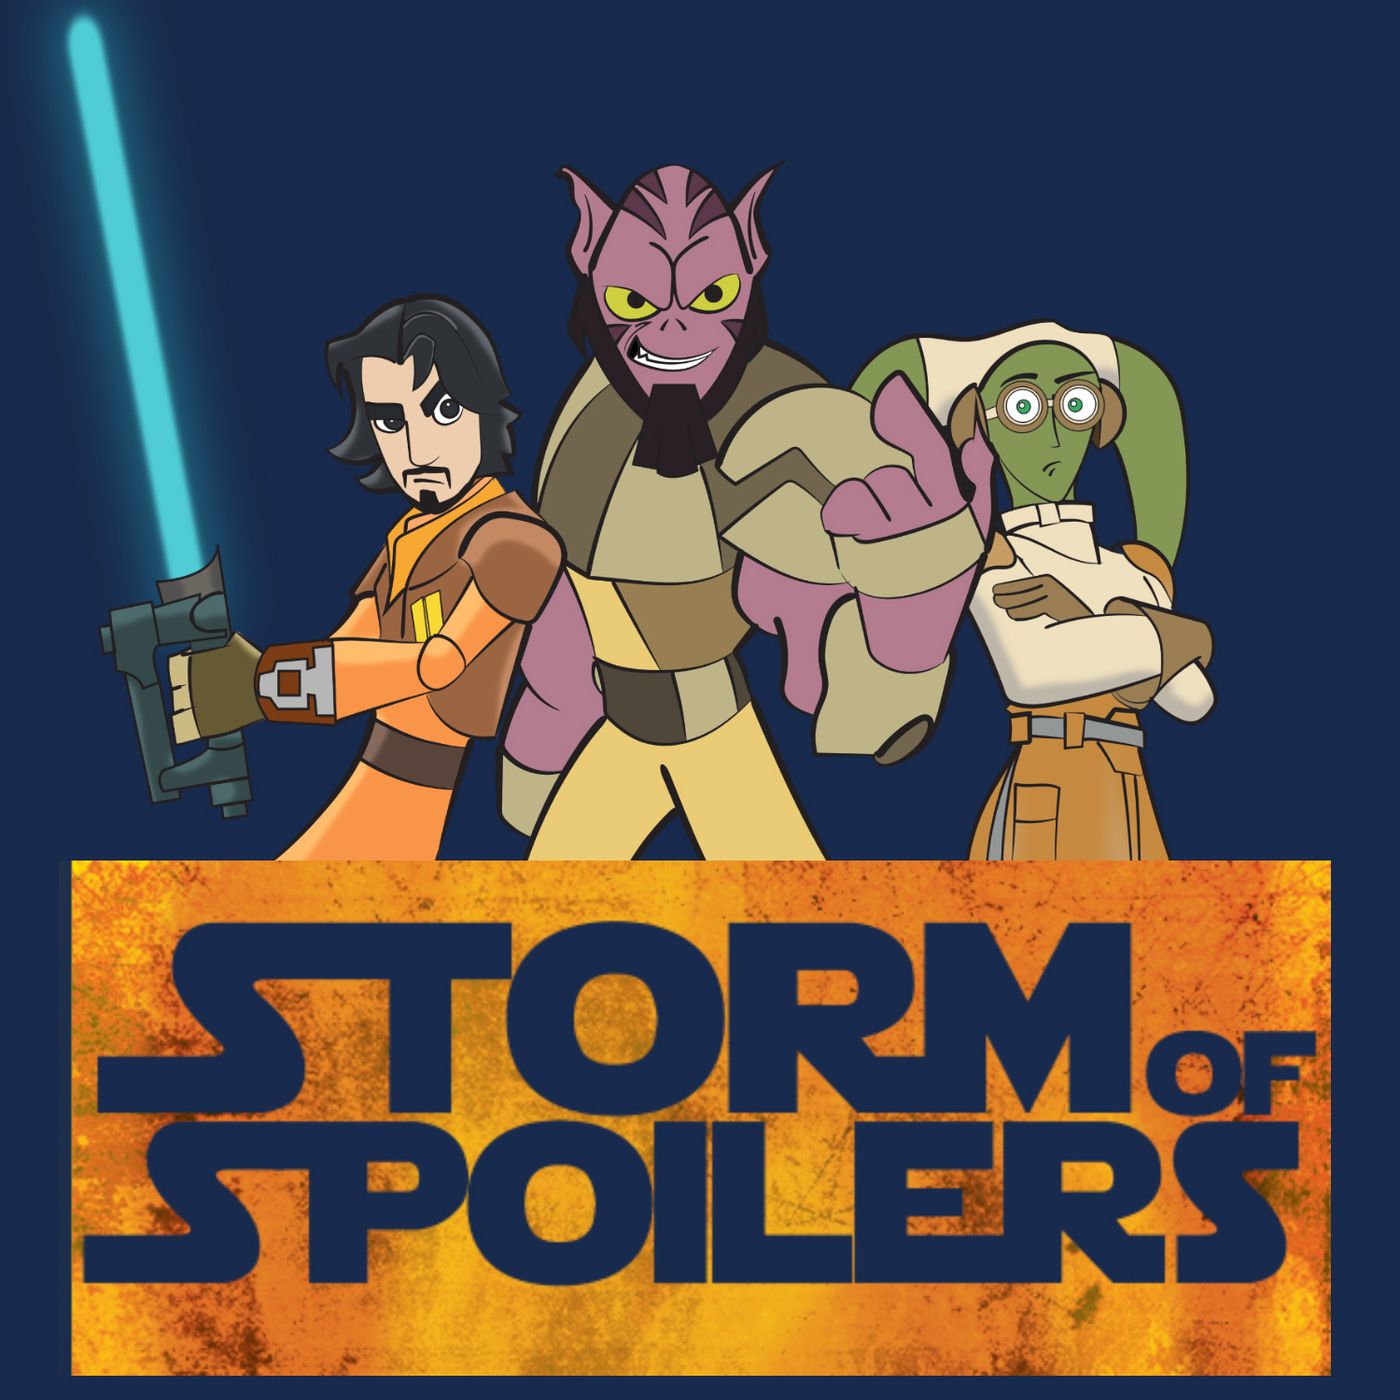 STORM OF SPOILERS TOUR: Star Wars: Rebels Season 3 and Rogue One